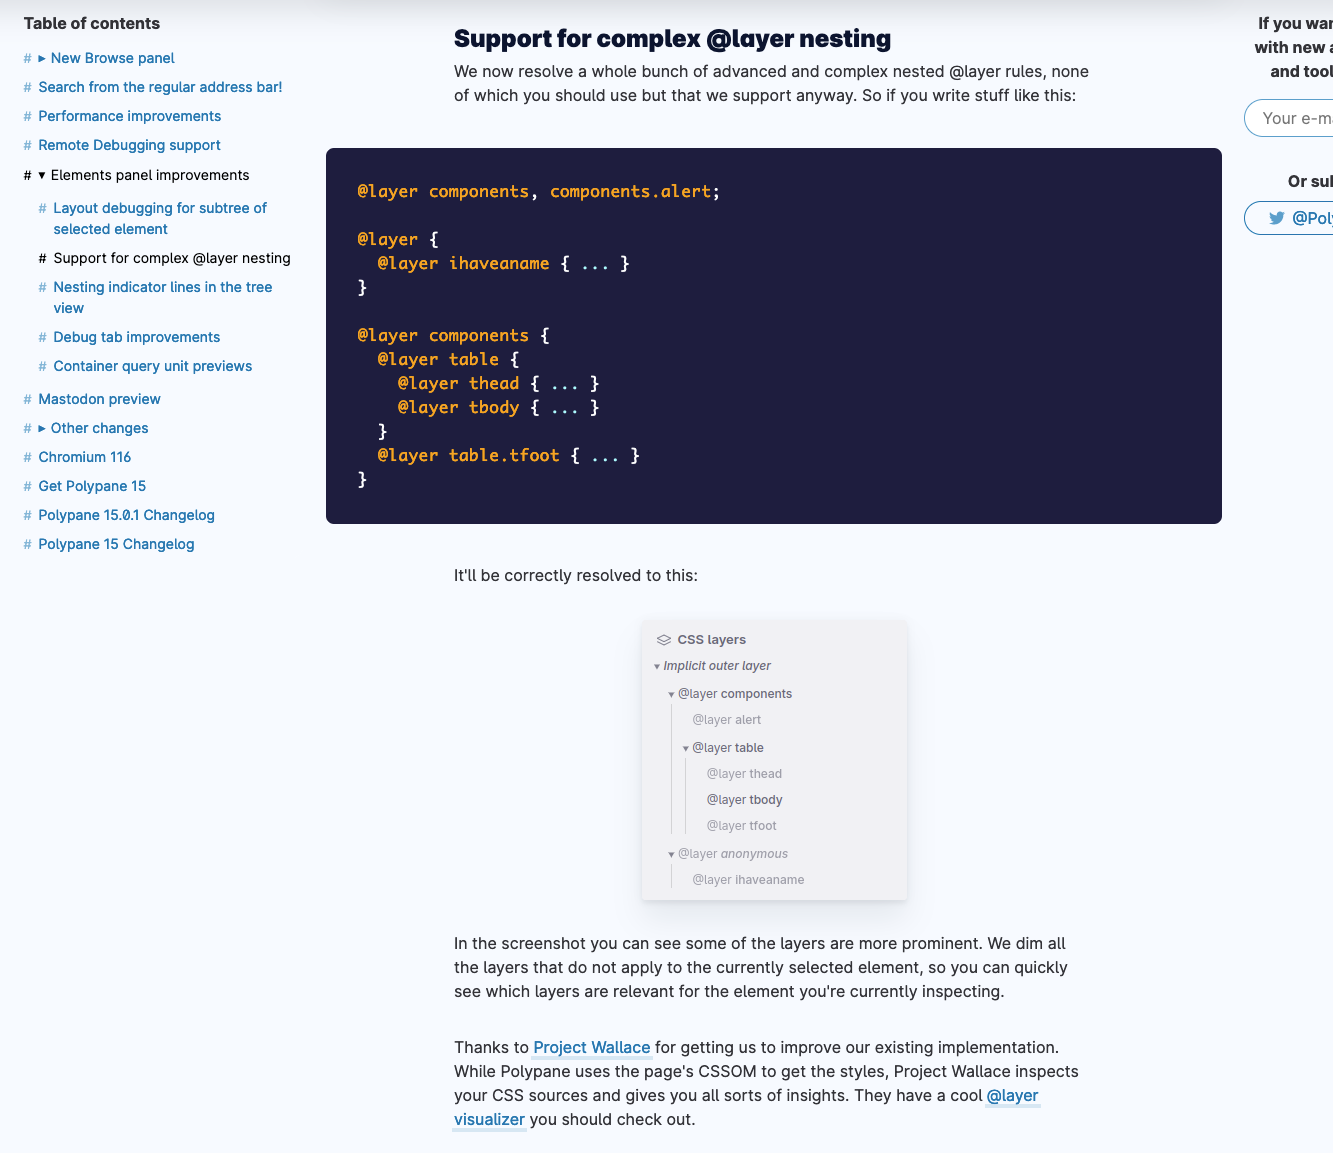 Screenshot of the Polypane blog with the section about CSS cascade layers and Project Wallace's visualizer